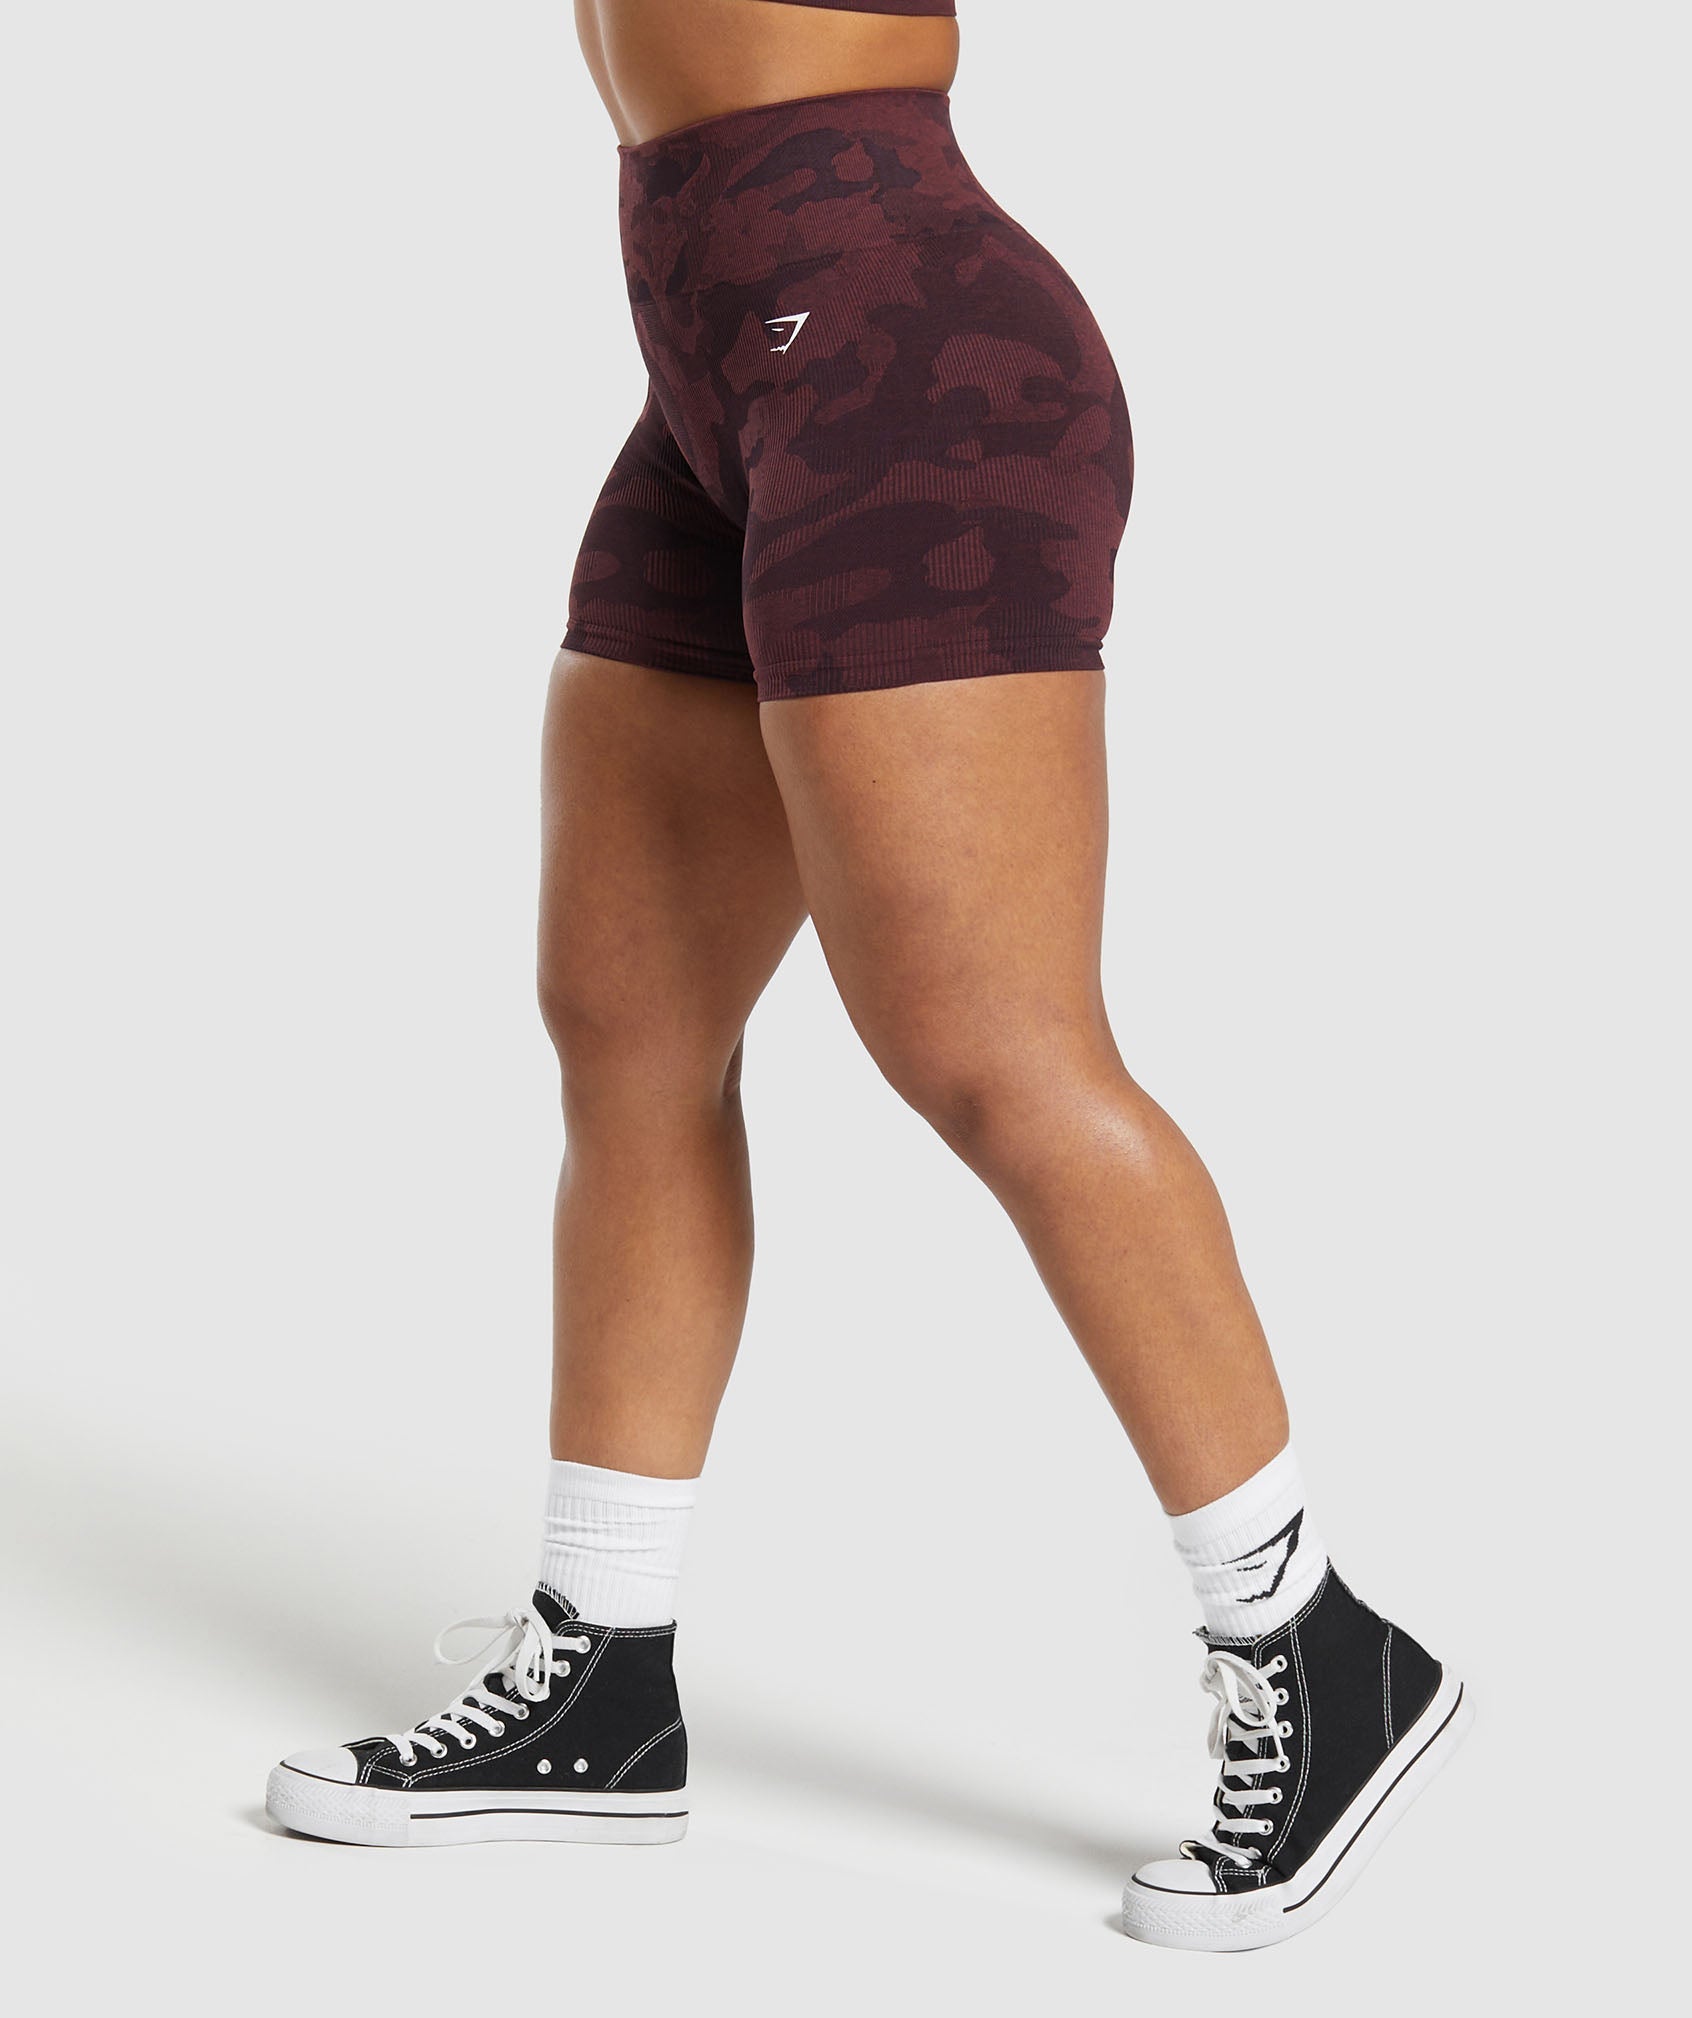 Adapt Camo Seamless Shorts in Plum Brown/Burgundy Brown - view 3